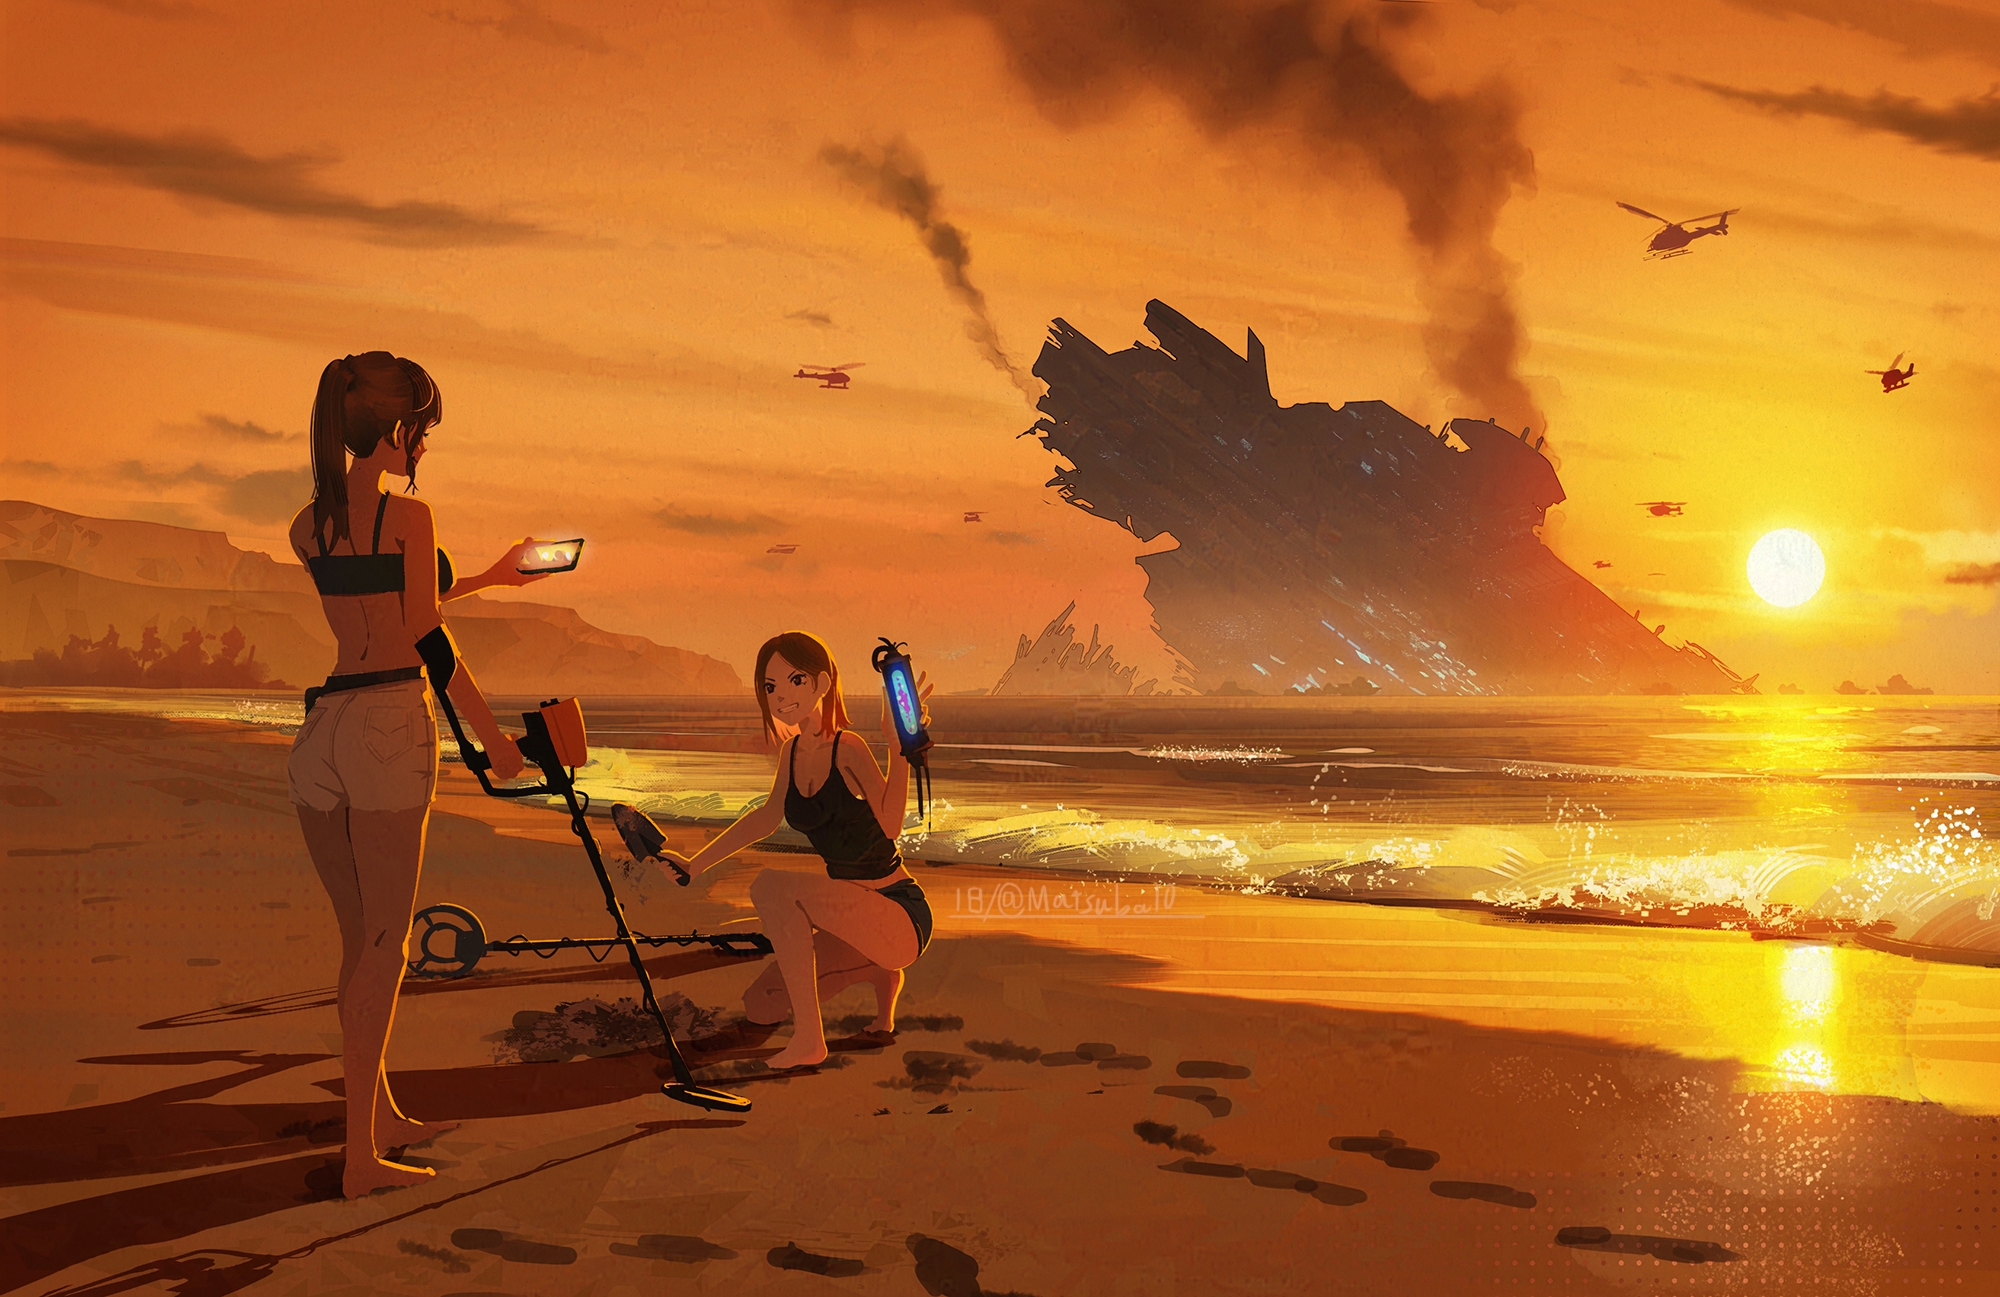 Anime 2000x1297 anime anime girls sunset hirokima women on beach water women outdoors Sun sunset glow two women ponytail watermarked spaceship long hair smoke helicopters sky clouds waves holding phone phone original characters sea sand metal detectors standing bent legs shovels